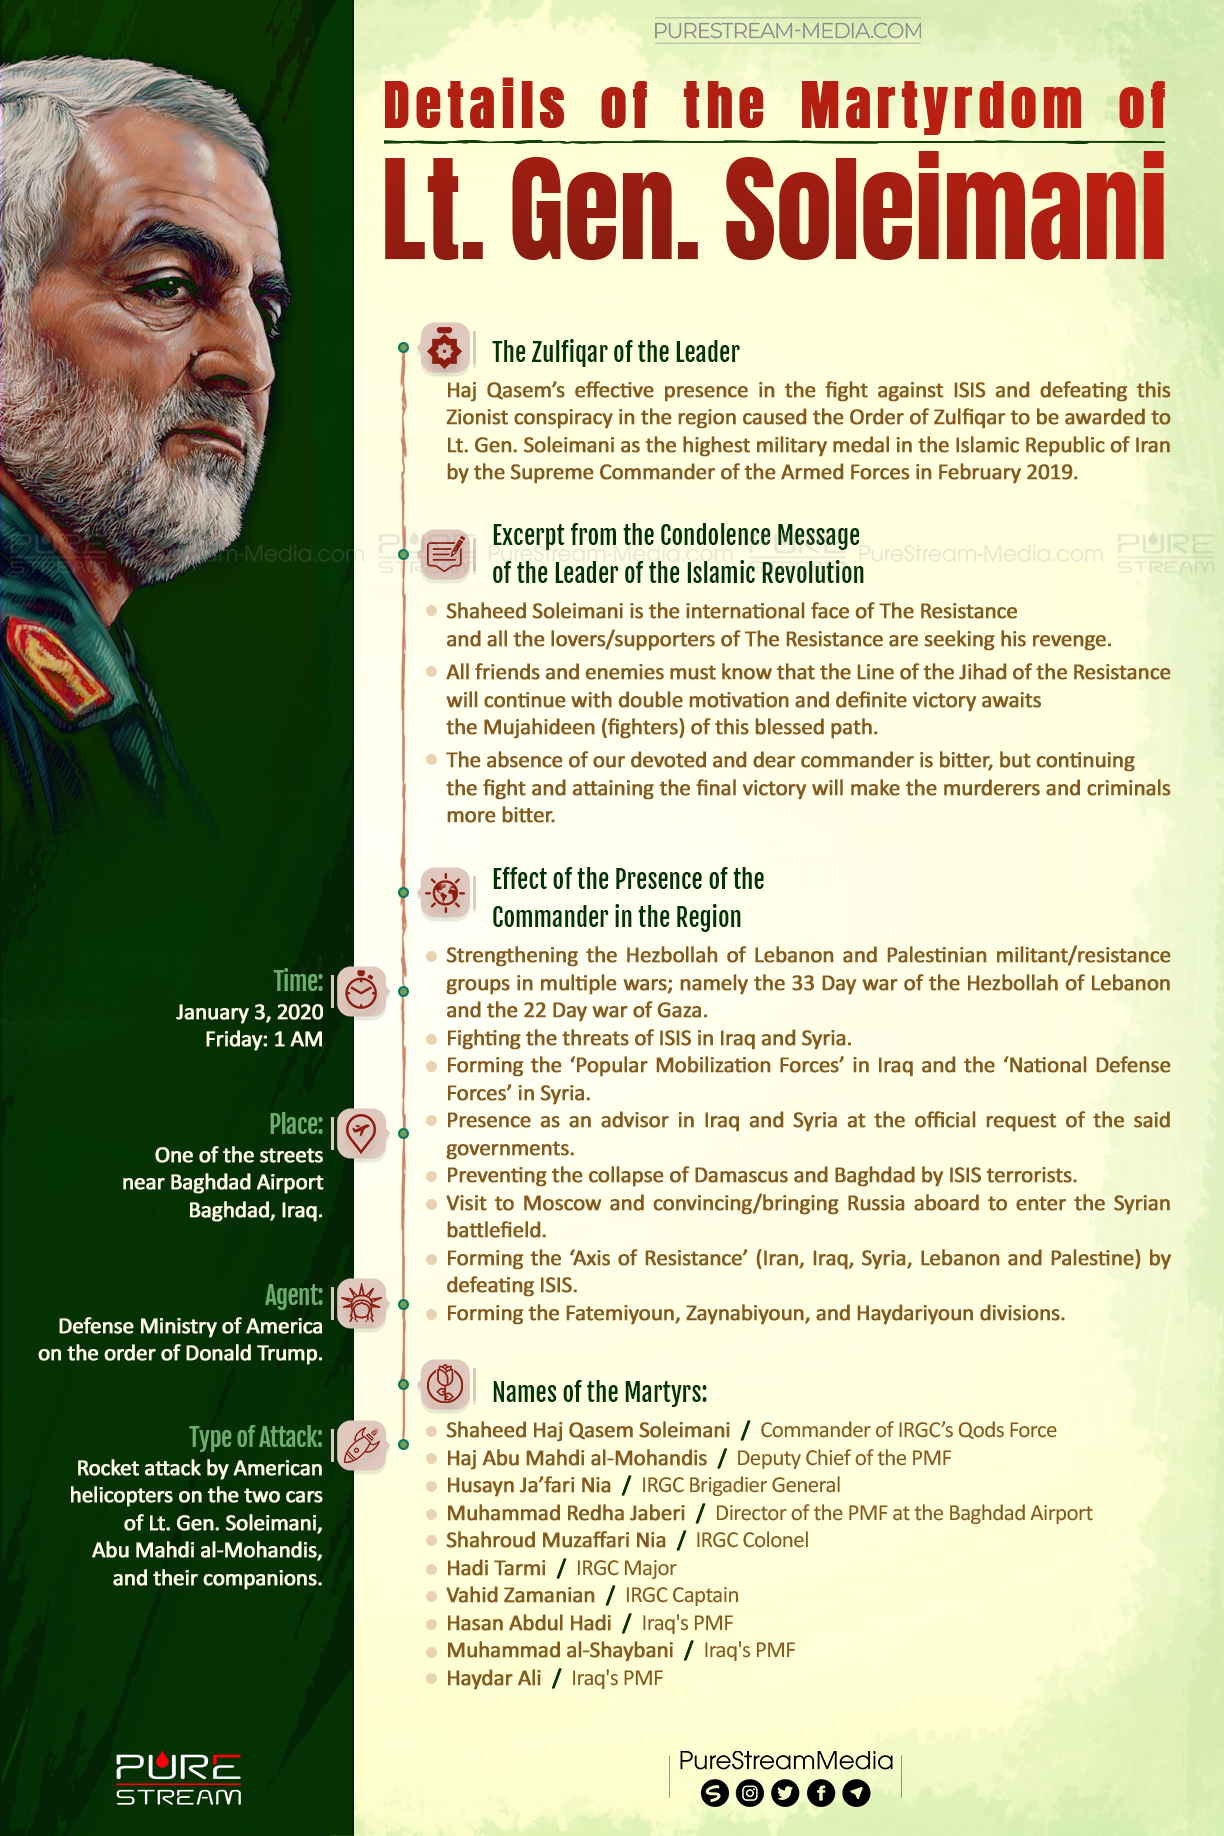 Details of the Martyrdom of Lt. General Soleimani | Infographic